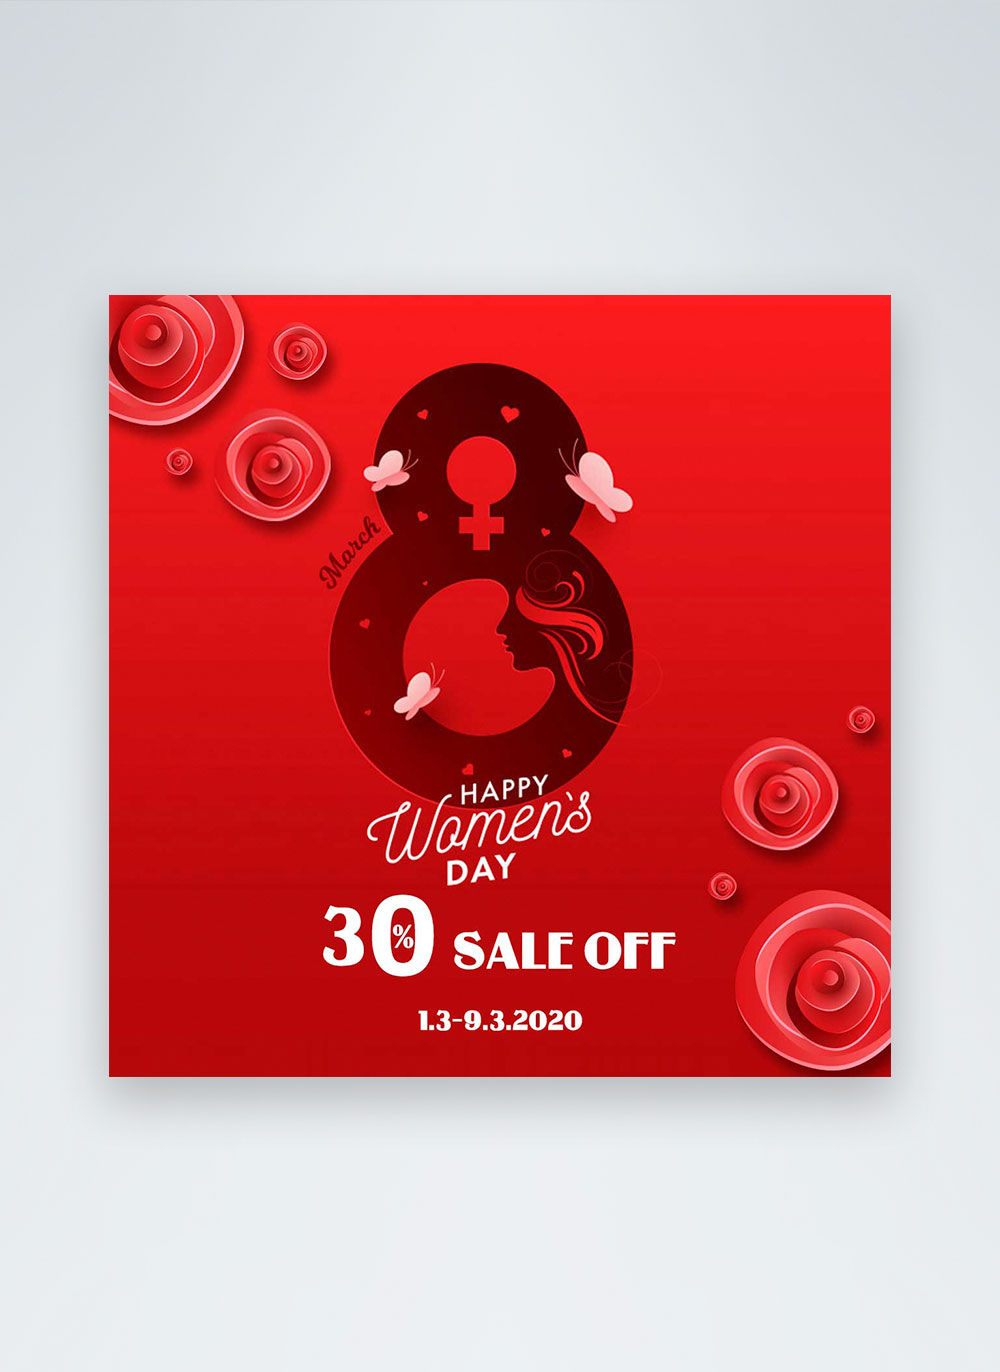 Happy womens day discount social media post template image_picture ...